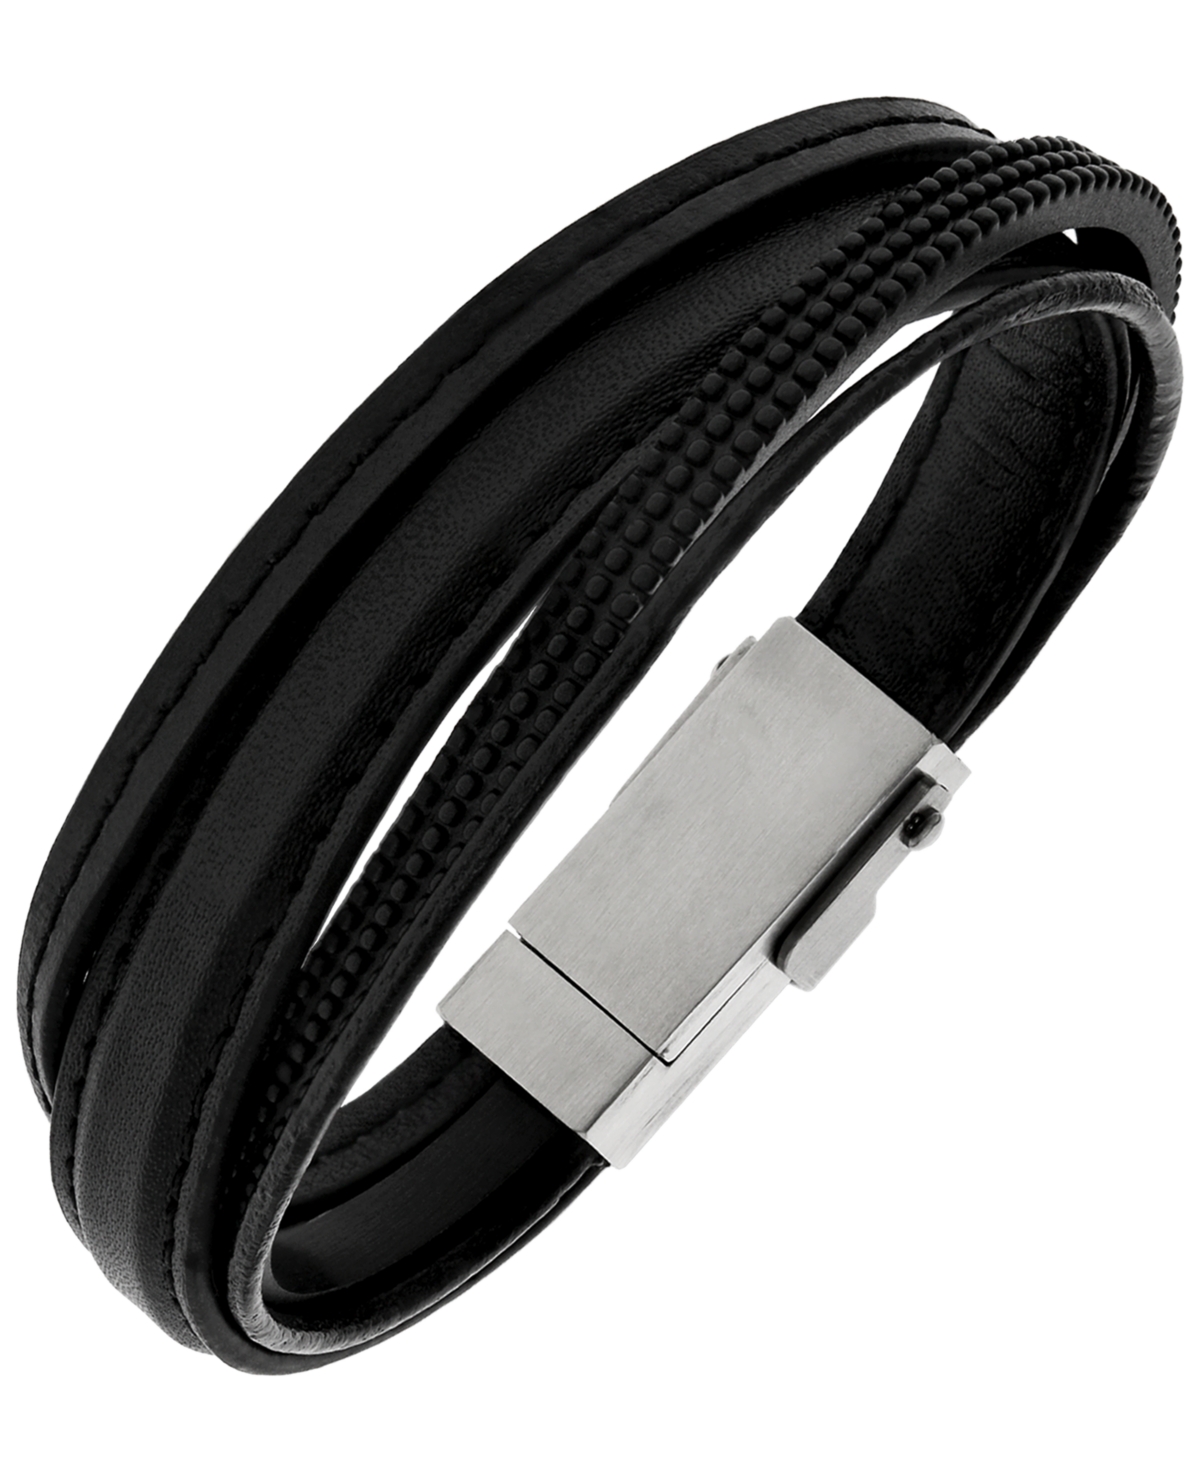 Sutton Multi-Strand Leather And Lightening Cable Bracelet With Usb Clasp - Black